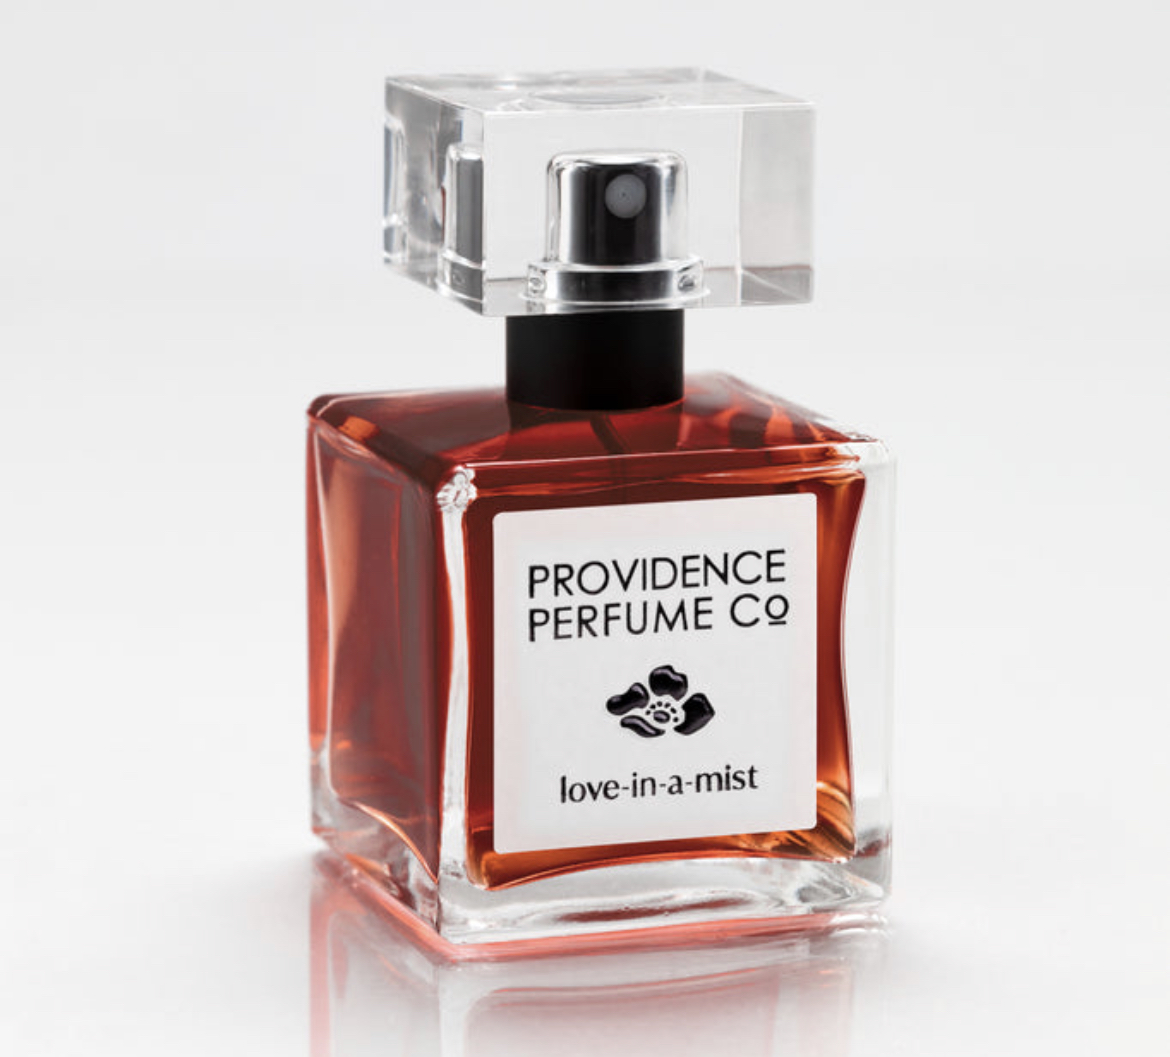 Providence Perfume Co love in a mist